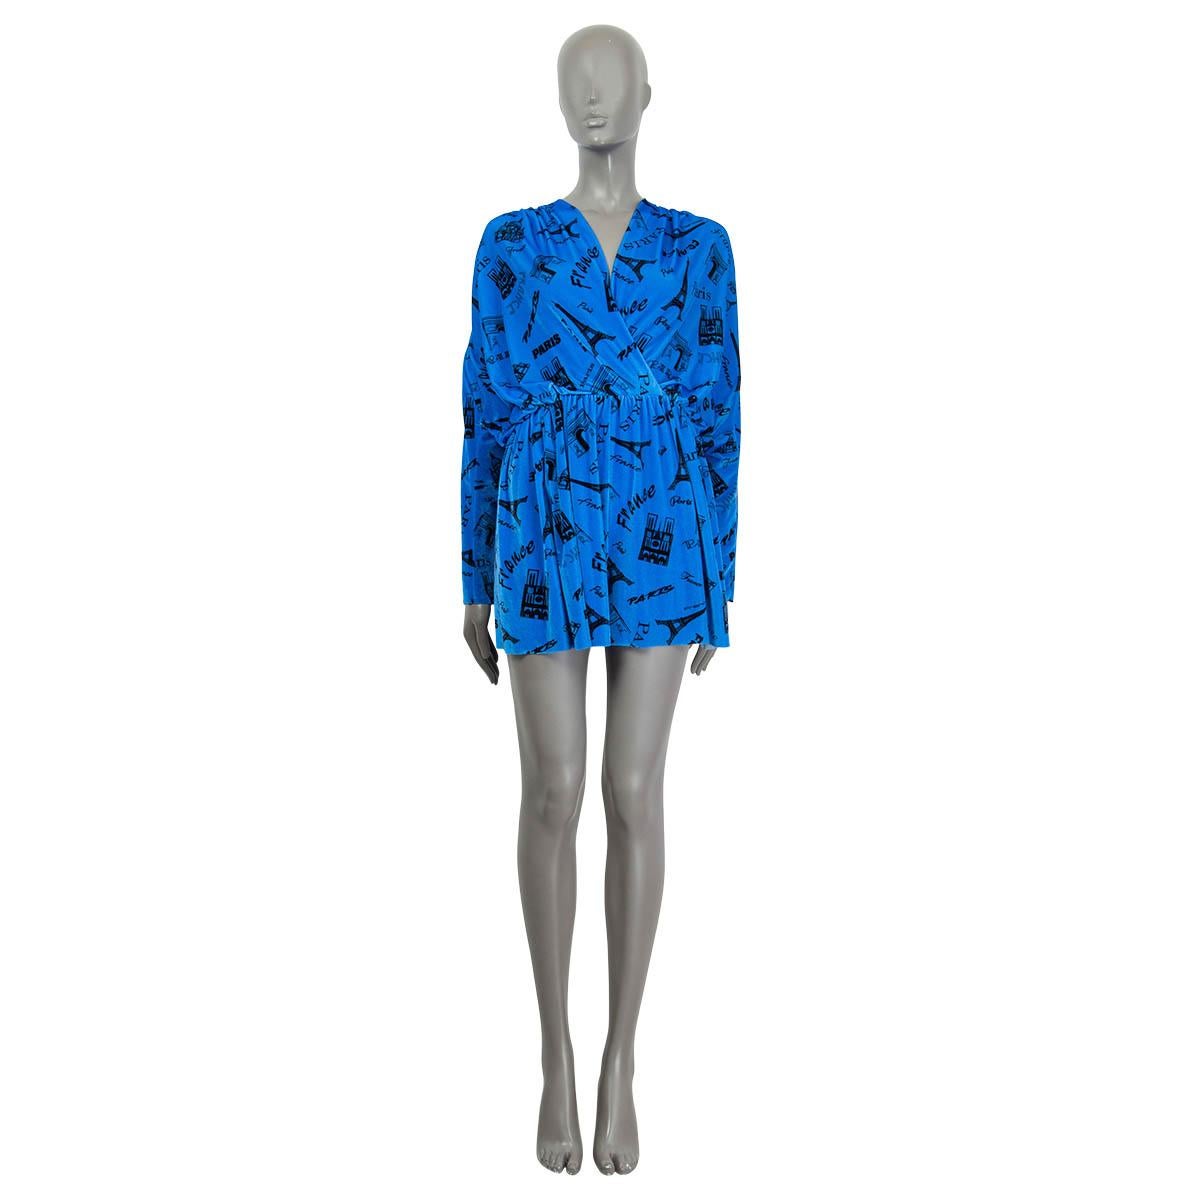 100% authentic Balenciaga Paris printed jumpsuit in electric blue and black stretch-velvet (polyamide (85%) and elastane (15%)). Features long sleeves and ruched shoulders. Unlined. Has been worn and is in excellent condition.

Measurements
Tag